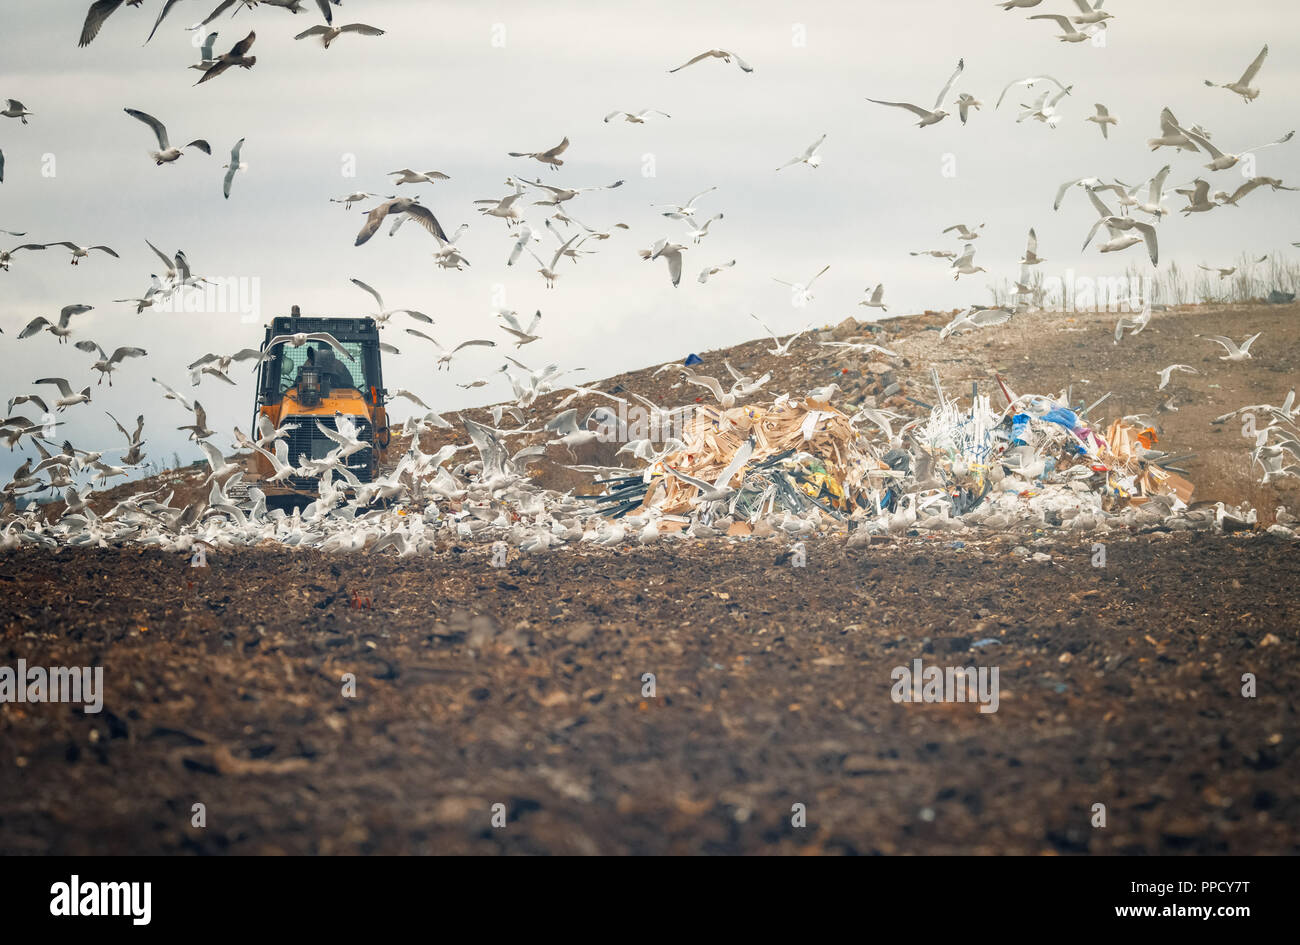 lot of many sea gulls  in city garbage dump search and catching food after special tractor working Stock Photo